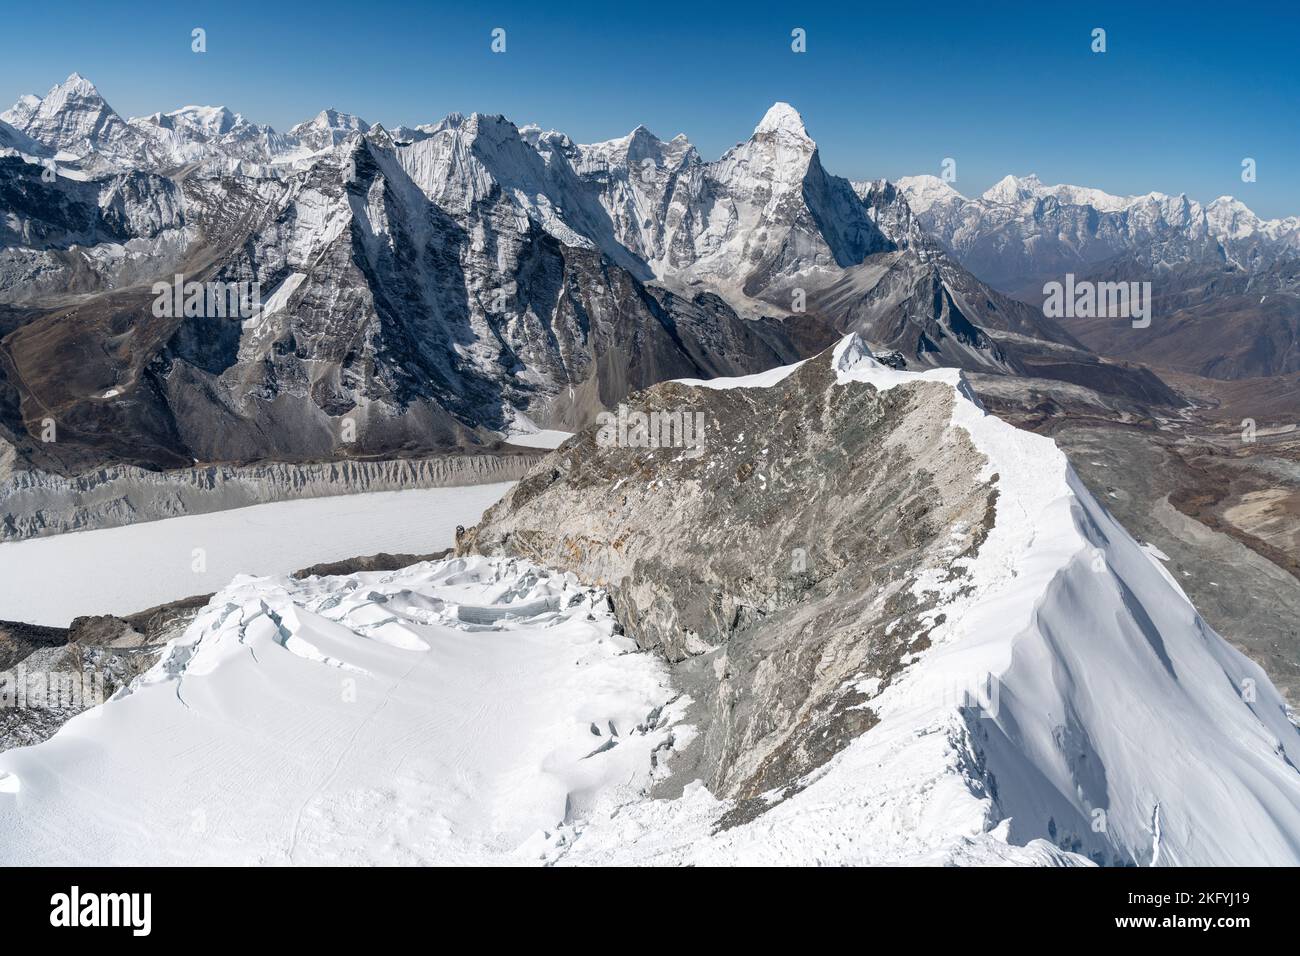 Daylight view of Mount Everest, Lhotse and Nuptse and the rest of Himalayan range from air. Sagarmatha National Park, Khumbu valley, Nepal. Mountain Stock Photo